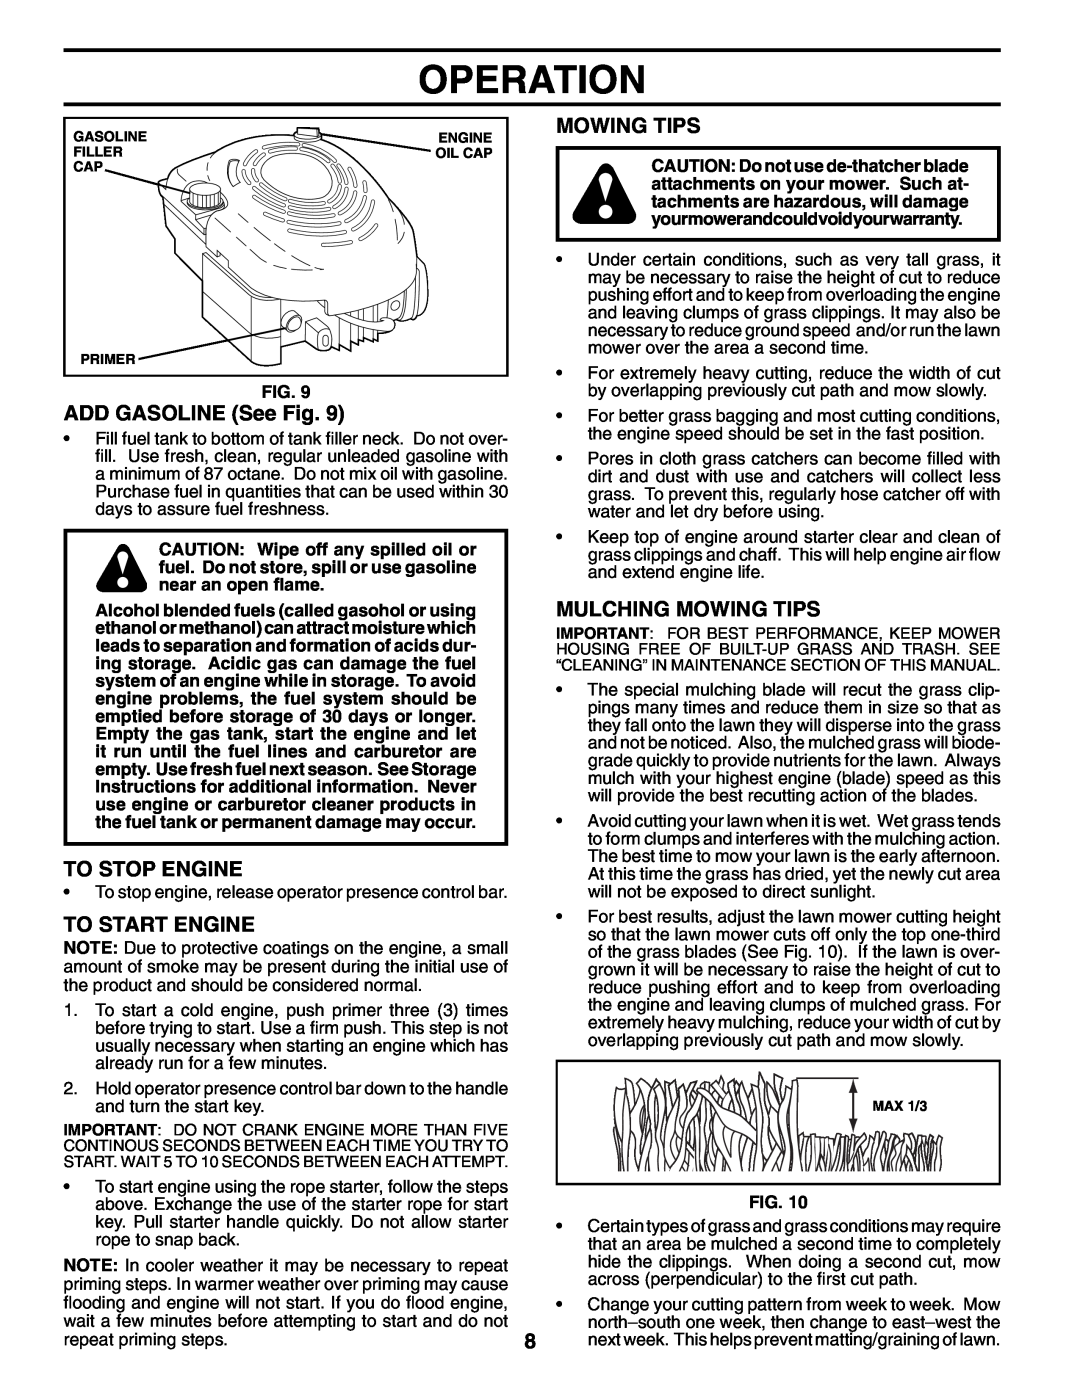 Husqvarna 65022ES owner manual ADD GASOLINE See Fig, To Stop Engine, To Start Engine, Mulching Mowing Tips, Operation 